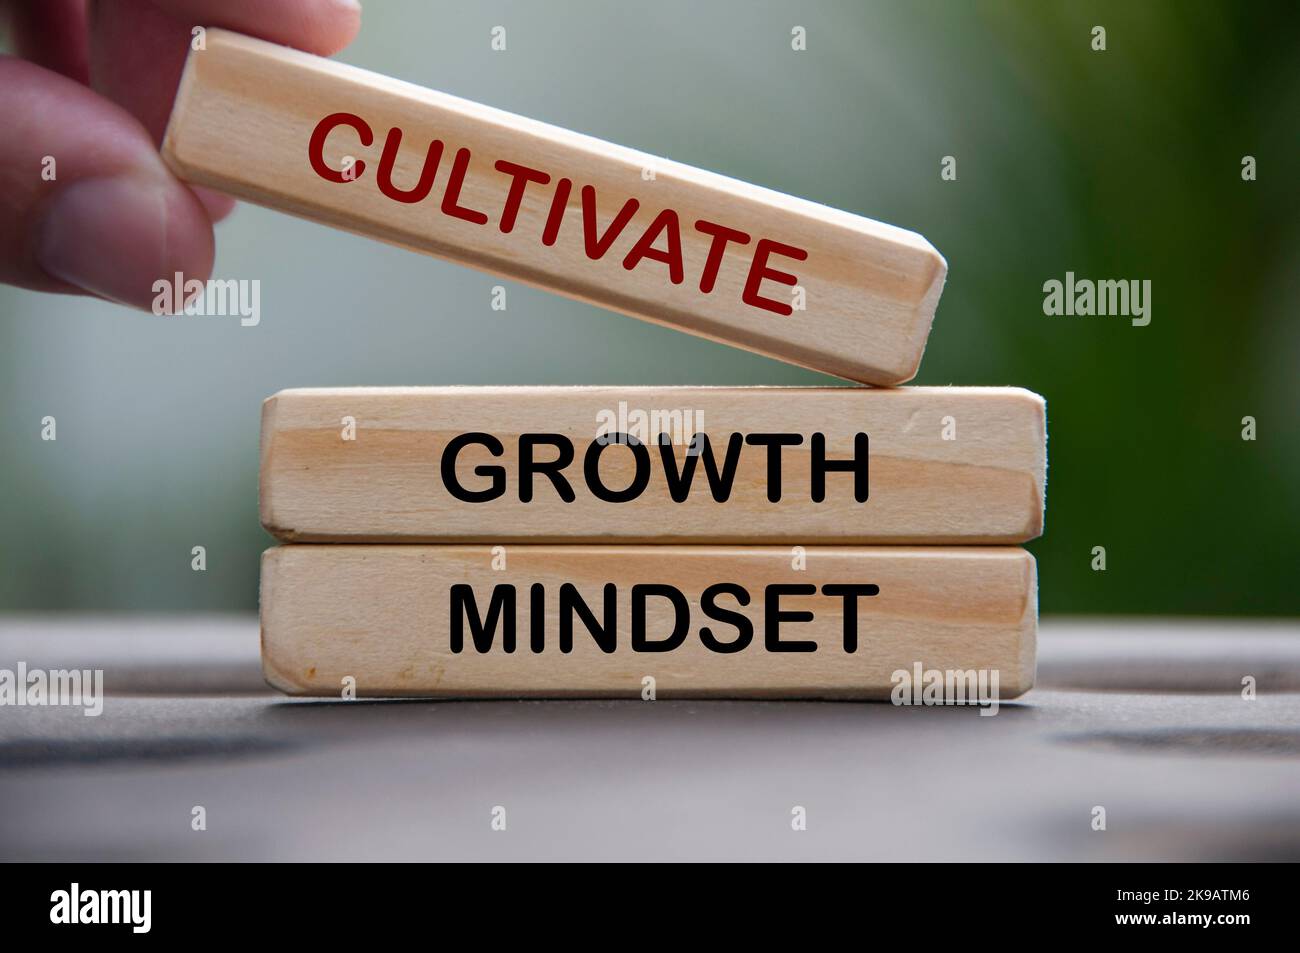 Cultivate growth mindset text on wooden blocks with blurred park background. Stock Photo